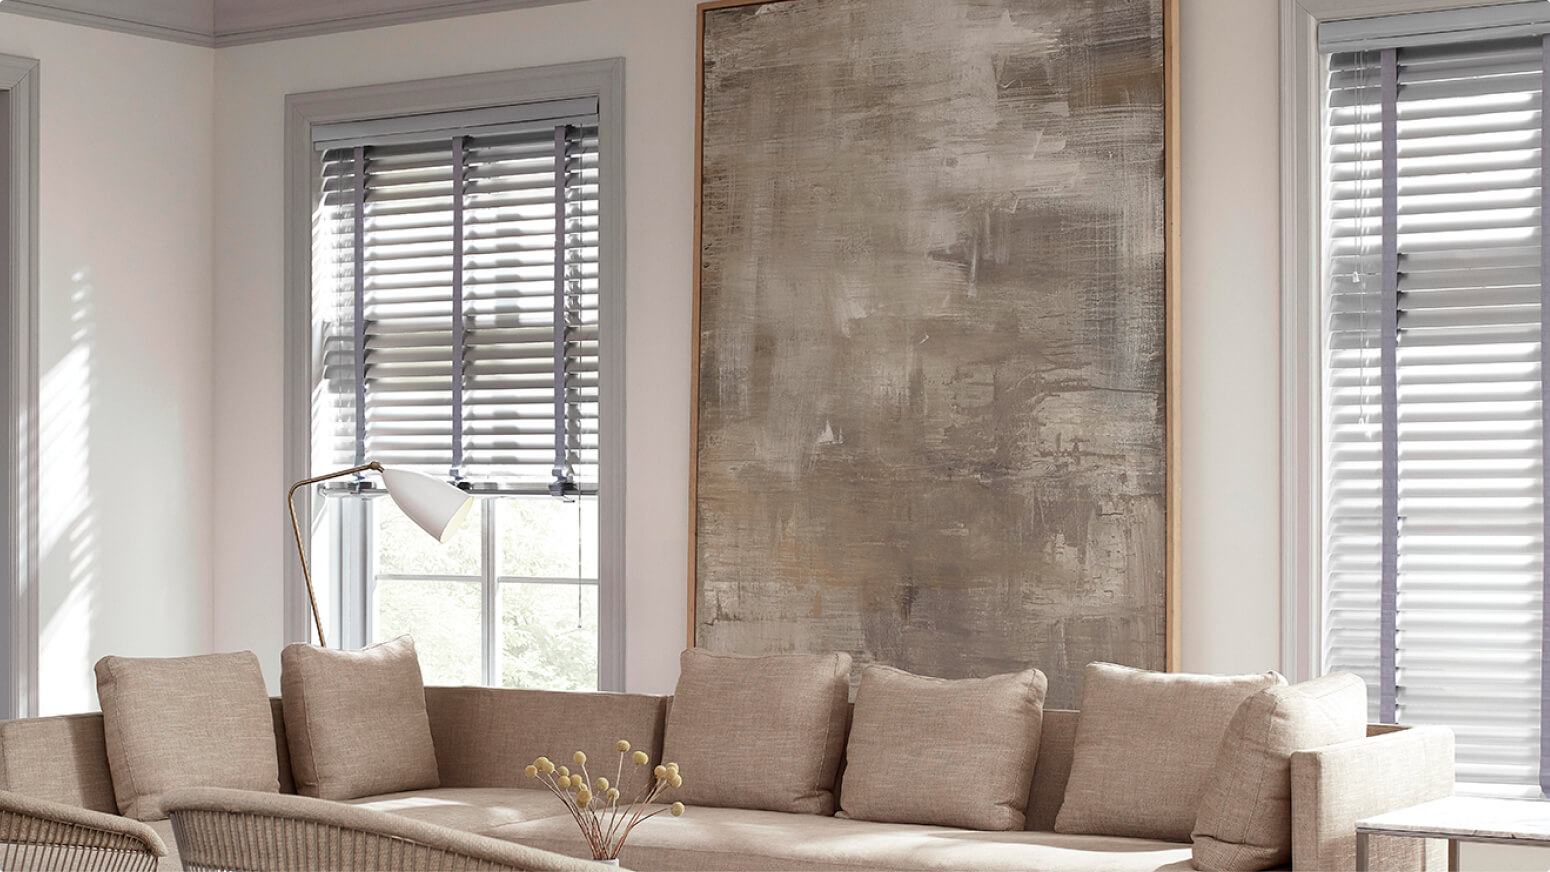 Find the Best Roman Shades Canada Shop Now for Stylish Window Coverings